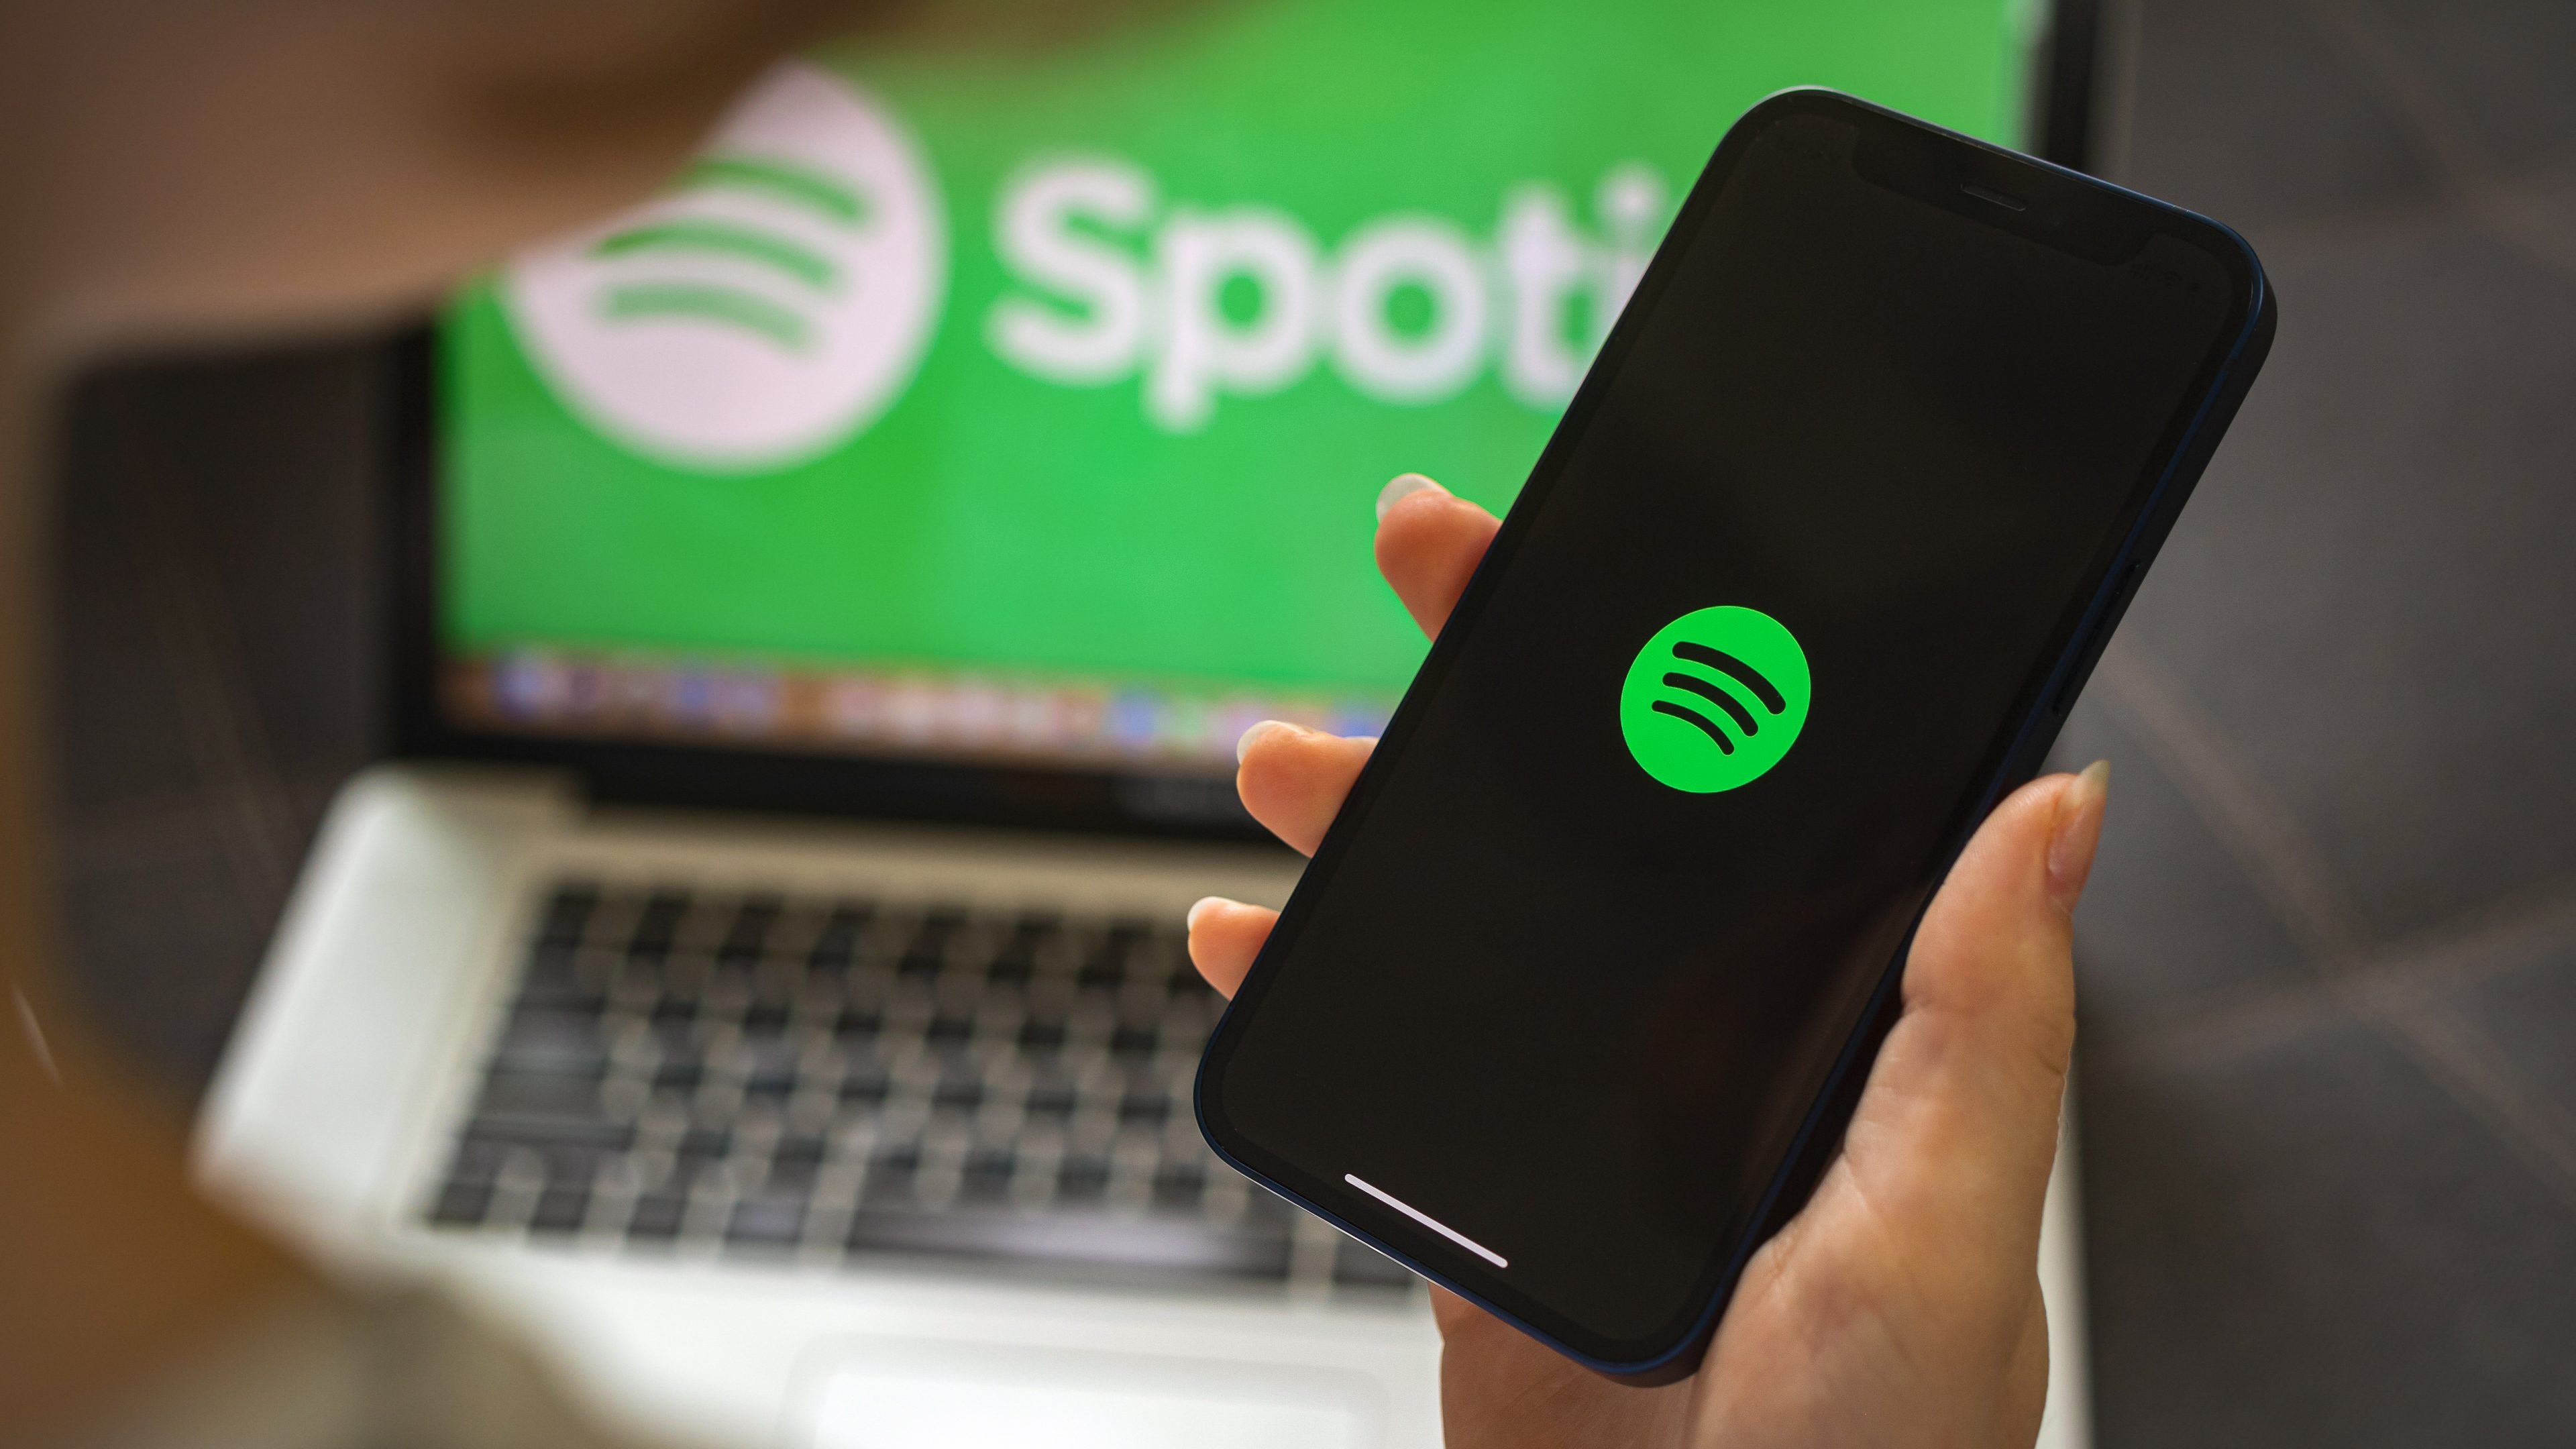 Spotify: A digital music, podcast, and video streaming service, Music app. 3840x2160 4K Wallpaper.